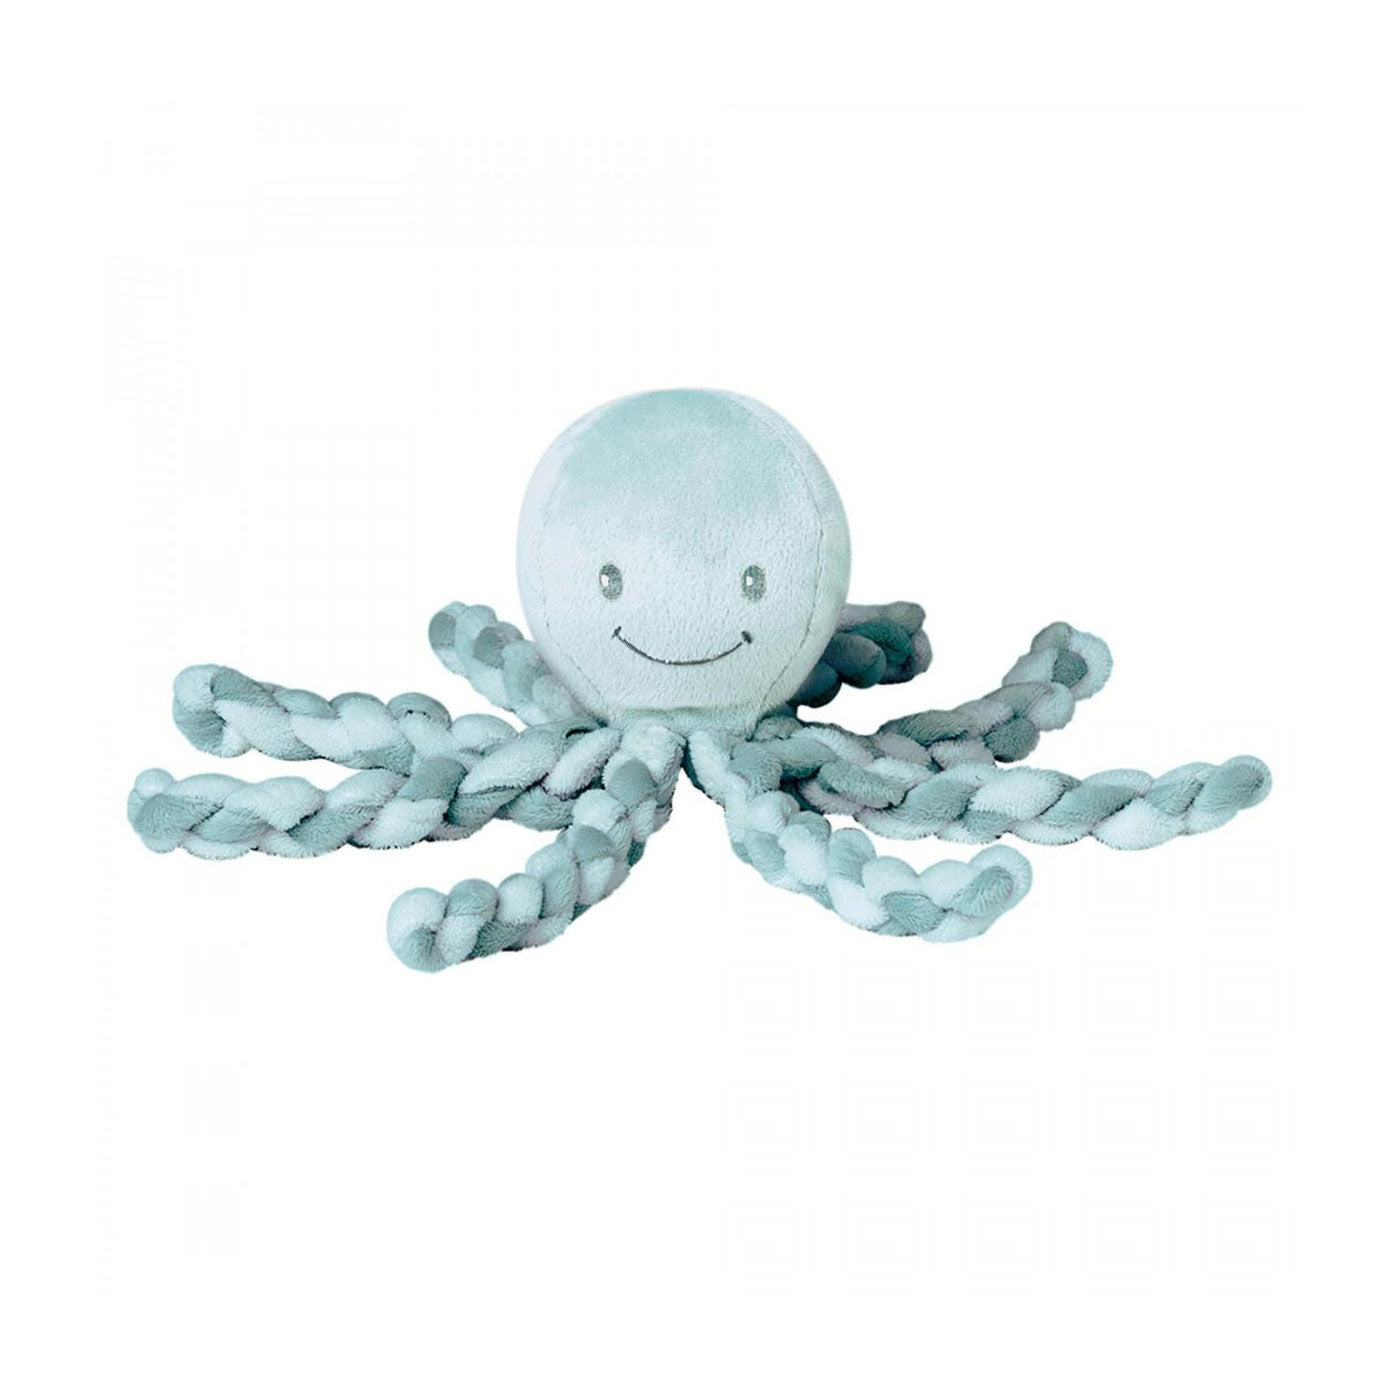 Meet Piu Piu the octopus, a cuddly character from Nattou that comes in various soft and calming colours. Little ones will love to stroke, pull and twirl the tentacles.